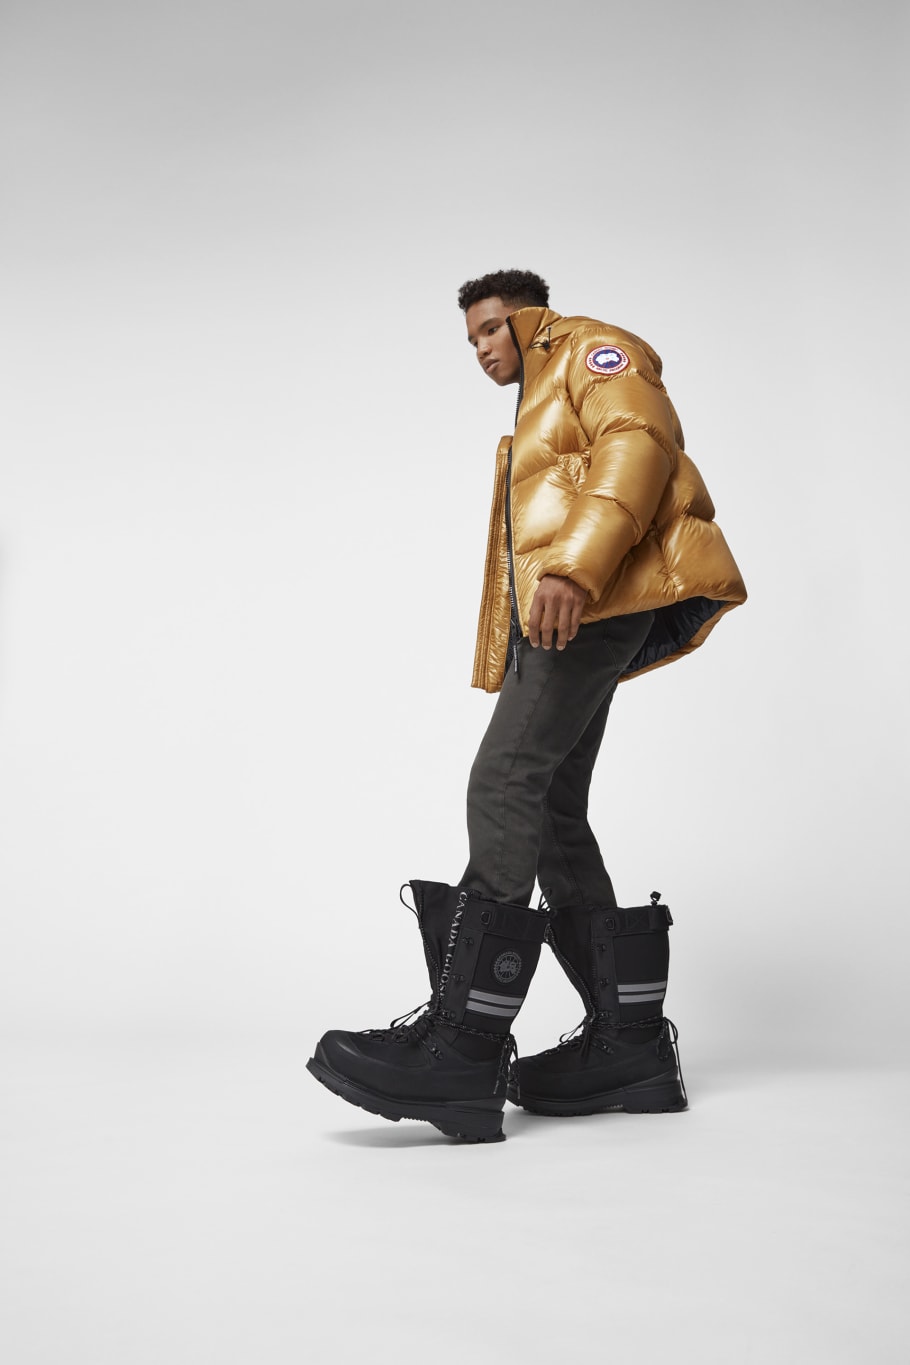 Nutteloos Opblazen Portugees Canada Goose Is Stepping Into Footwear for the First Time | Complex CA